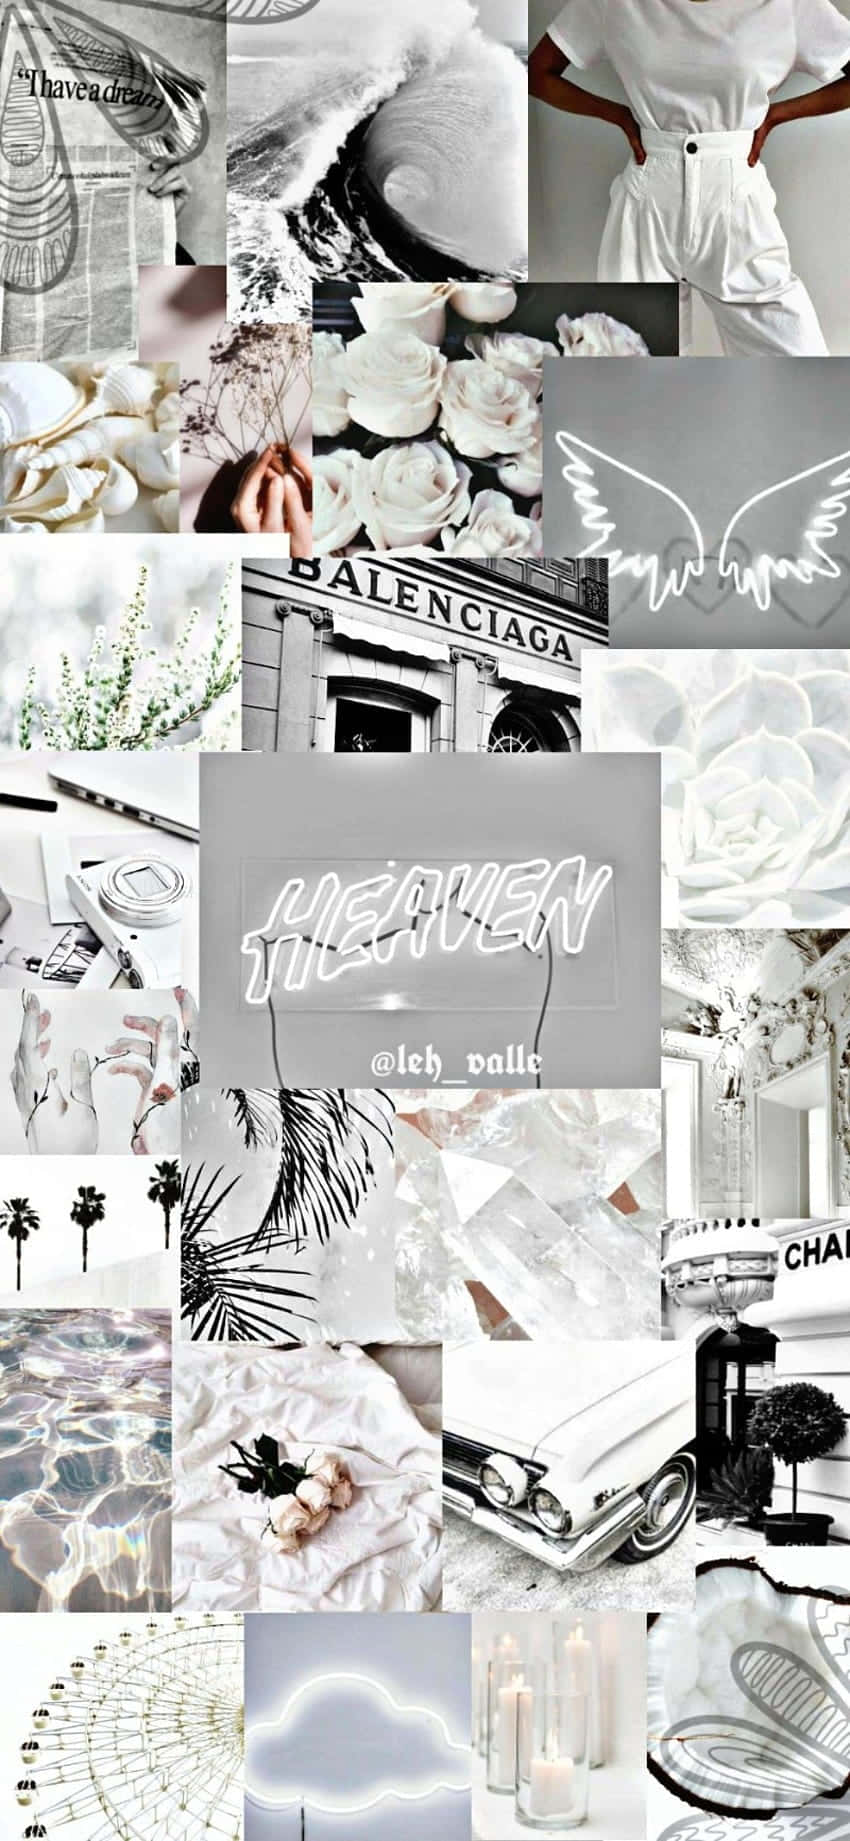 A Collage Of Pictures Of White And Black Items Wallpaper